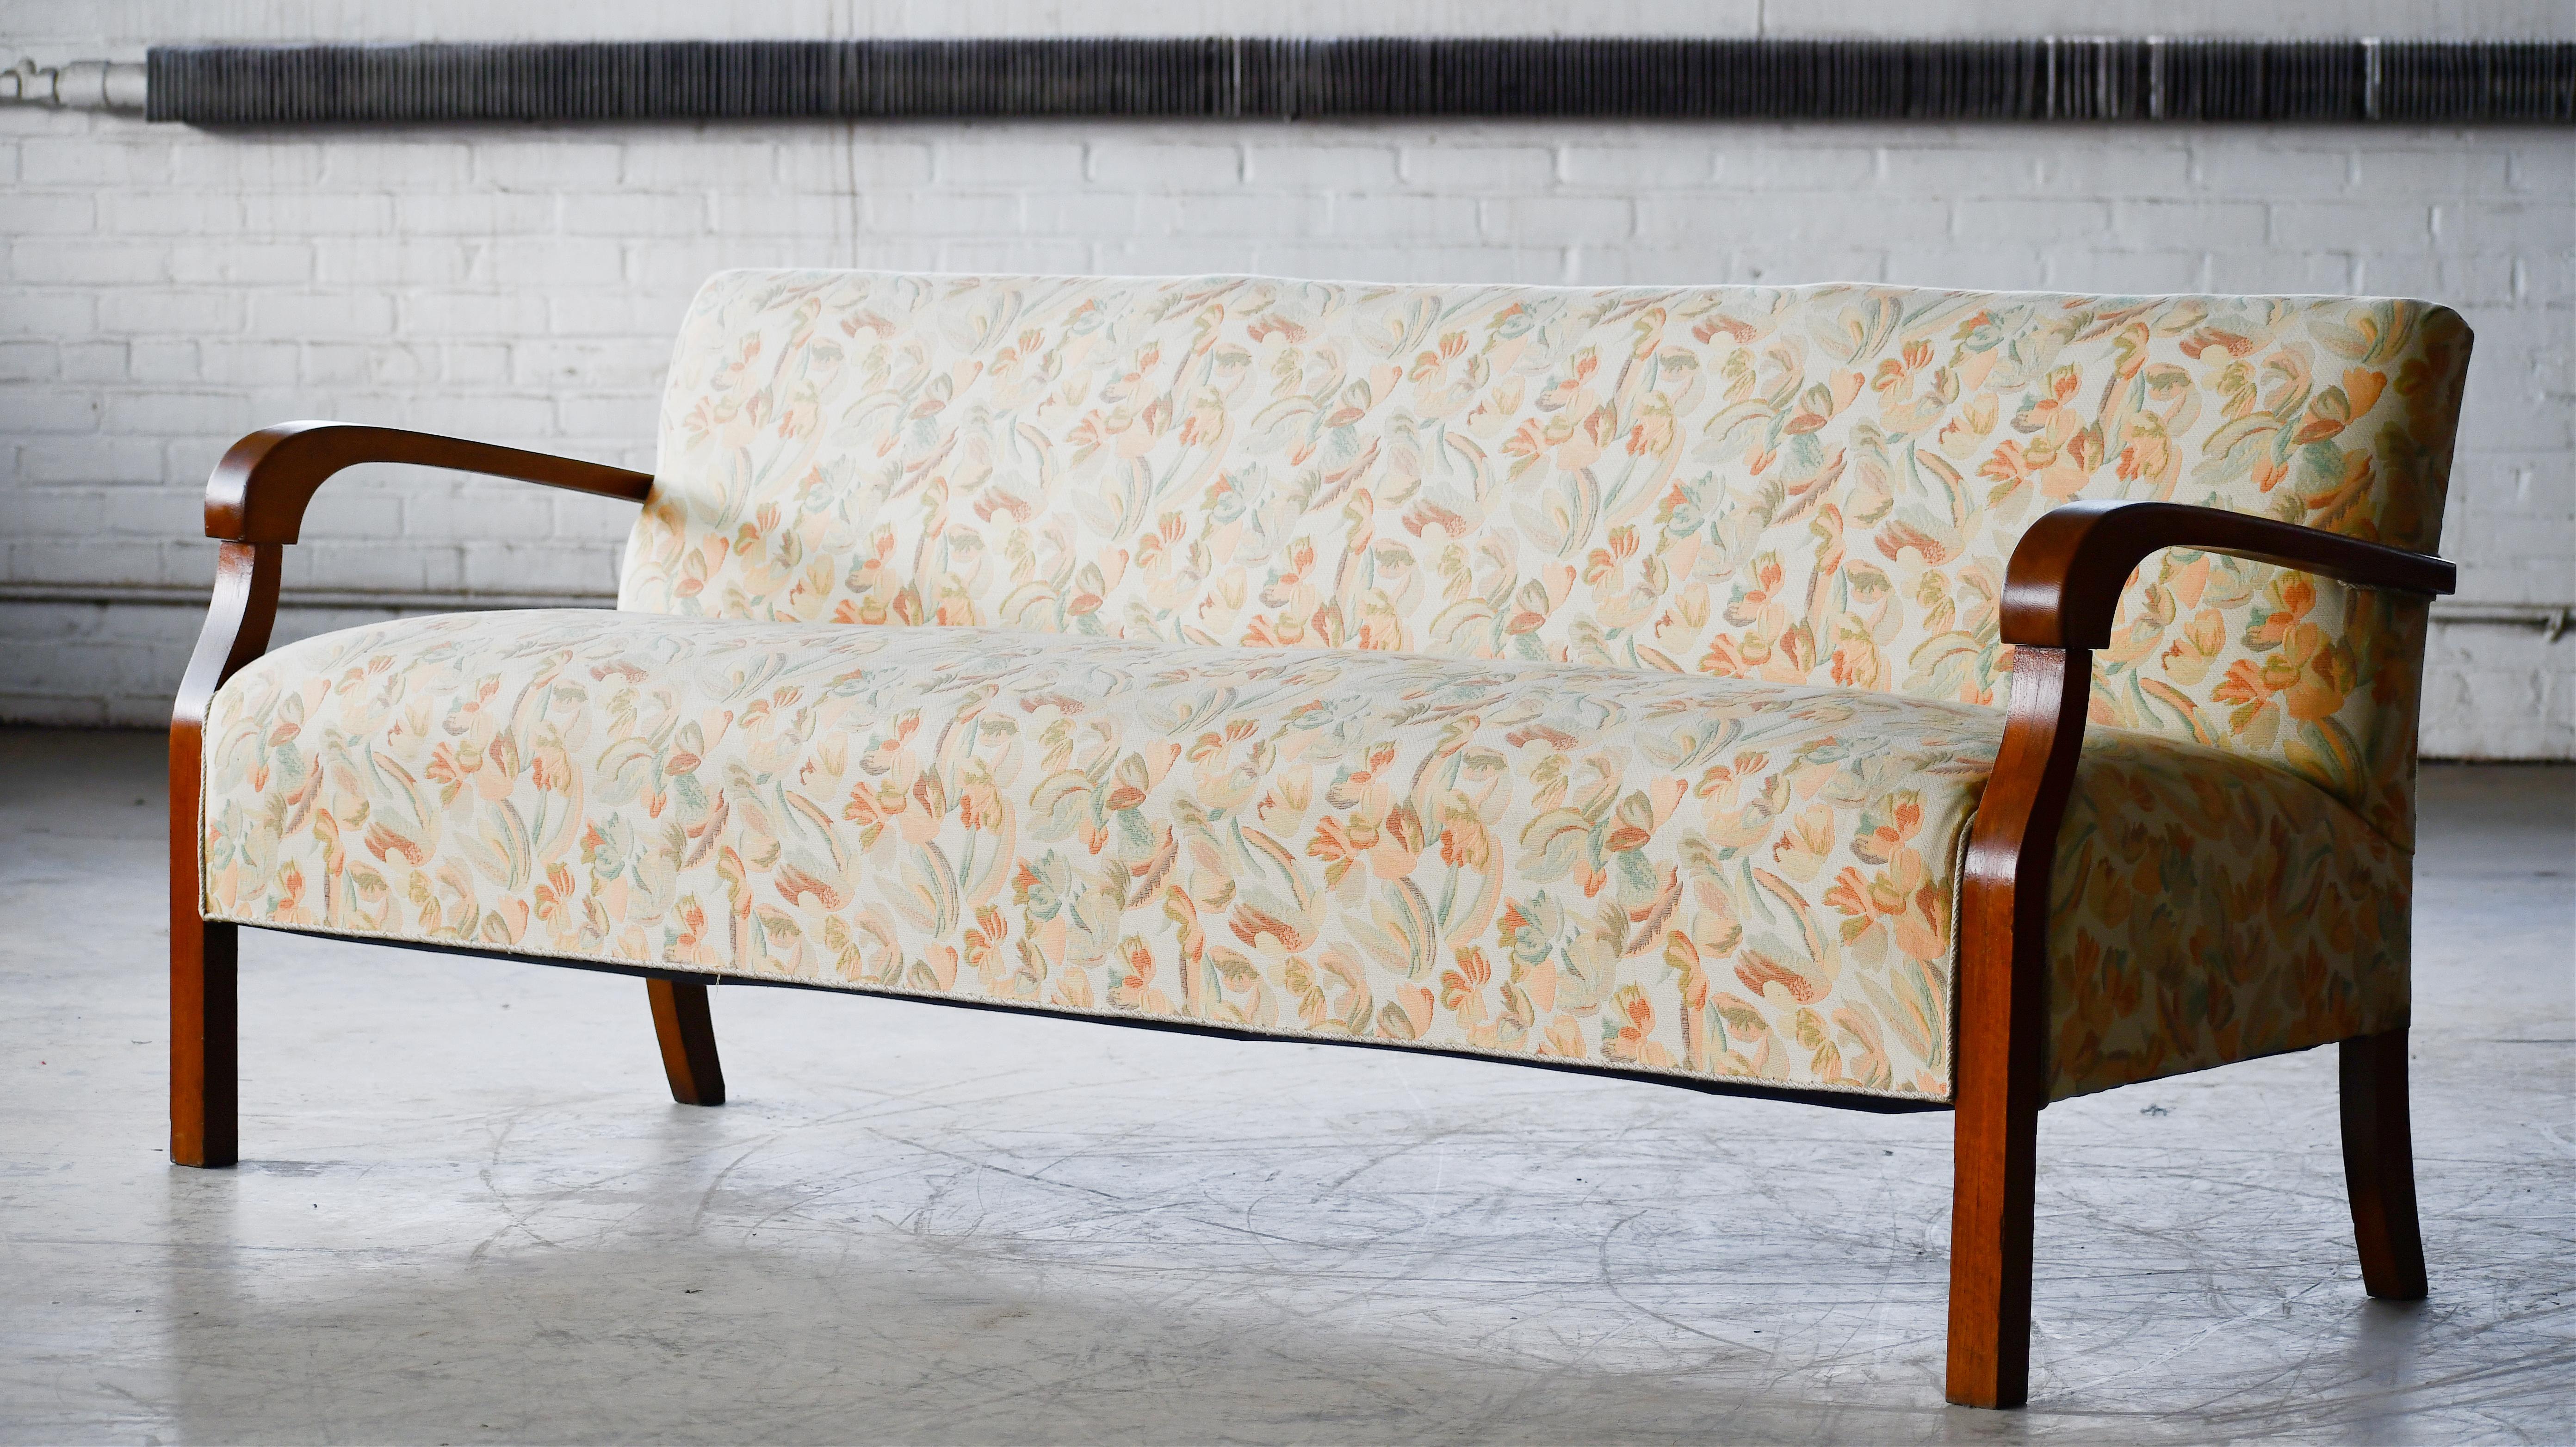 Mid-20th Century Danish Art Deco Sofa with Open Wooden Armrests, 1930's For Sale